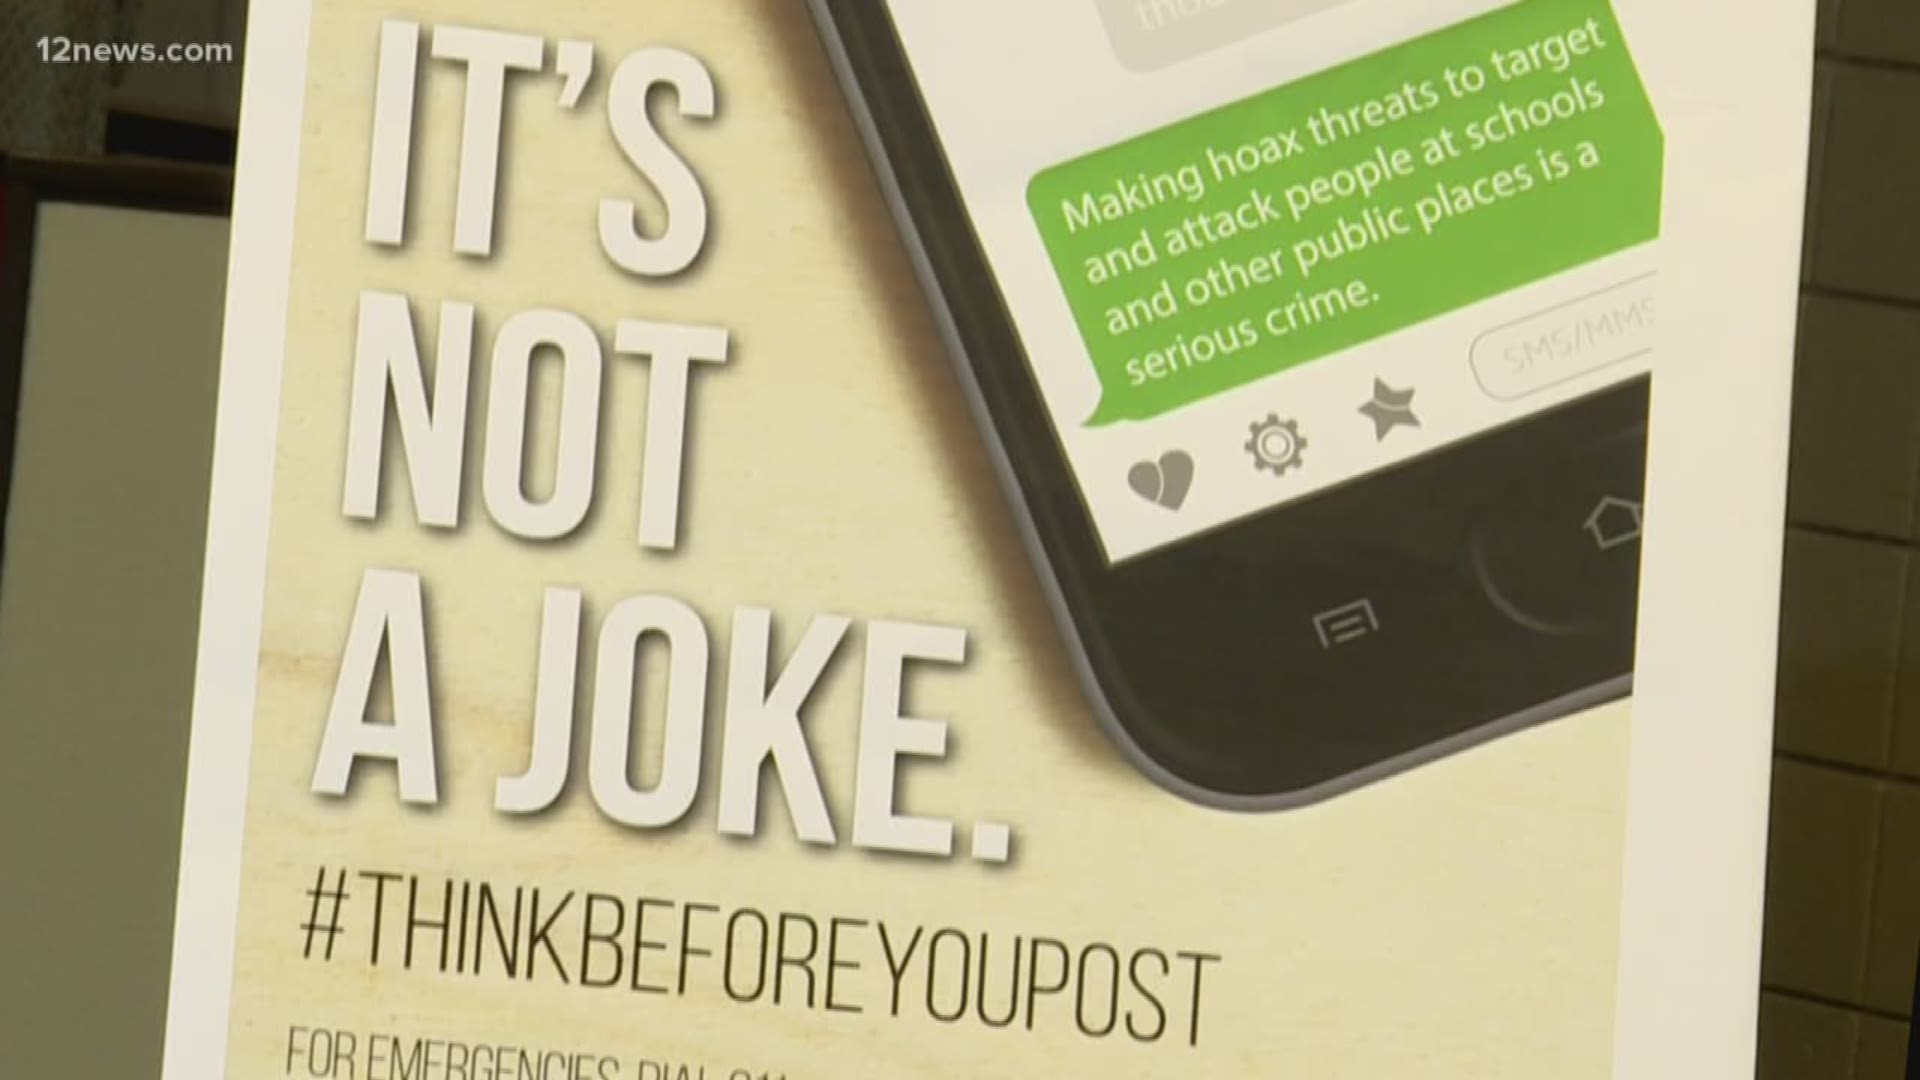 The FBI has issued a new public service announcement warning teens to stop making jokes about hurting, terrorizing or shooting others at schools. Even if it's just a joke these kinds of threats could land yo in jail for up to five years.